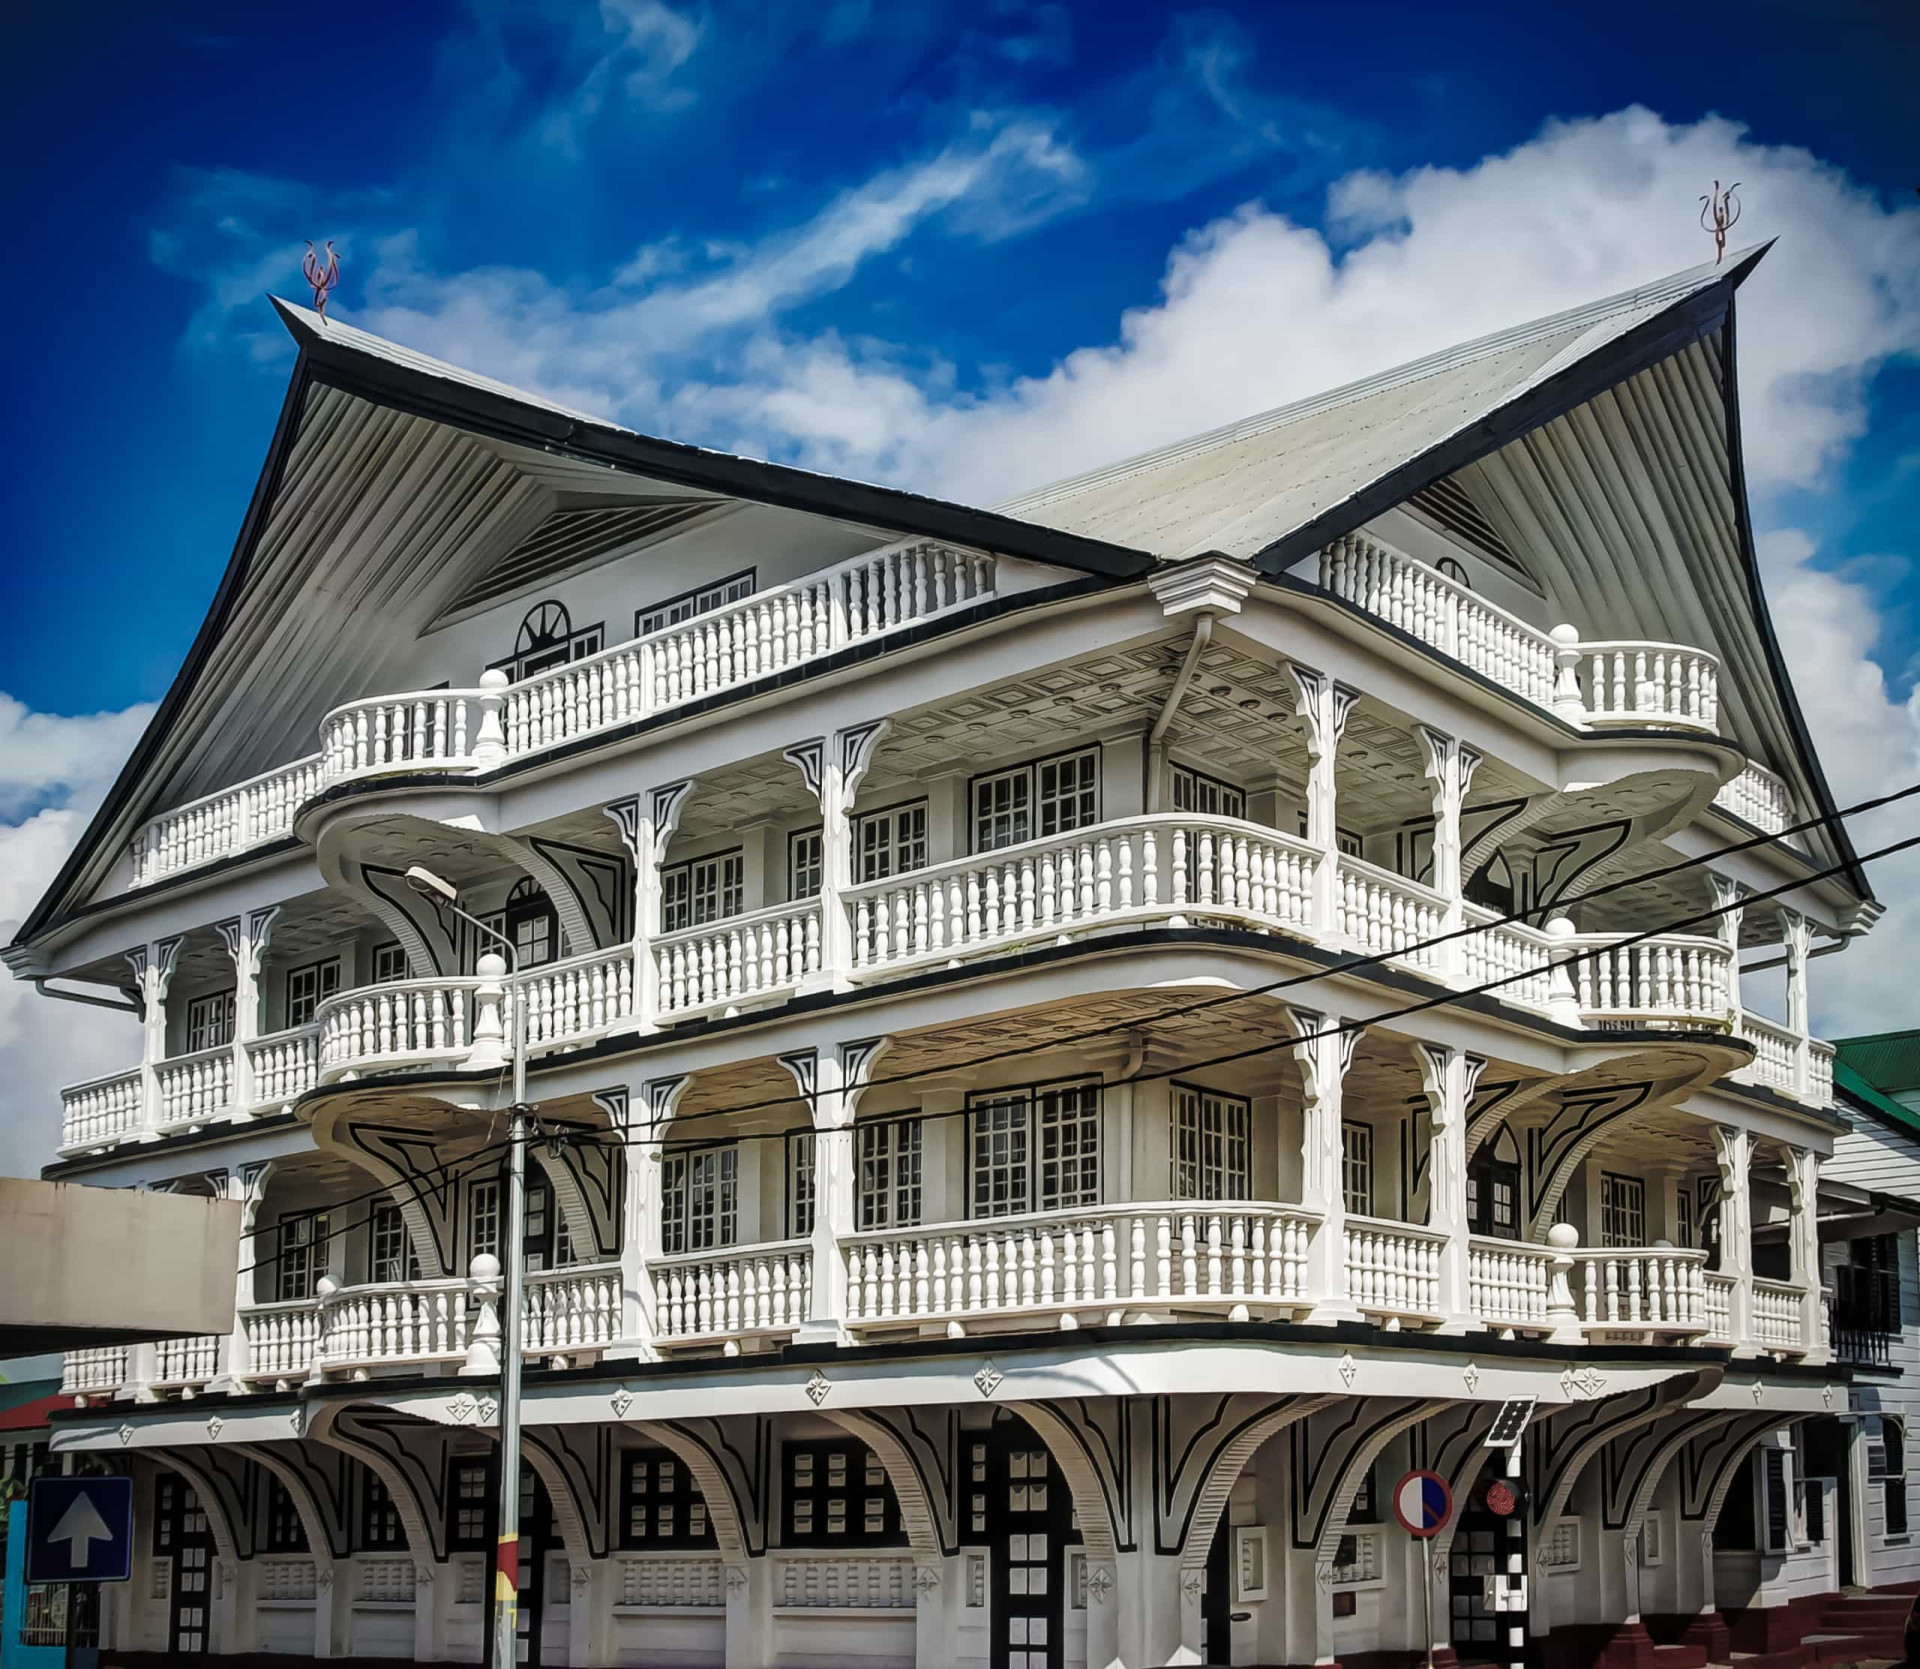 Paramaribo has to be one of the most ornate capital cities in the world. Its historic inner city is a UNESCO World Heritage Site, designated as such for the elaborate and highly decorated wooden Dutch colonial buildings that illustrate the gradual fusion of Dutch architectural influence with traditional local techniques and materials.<p>You may also like:<a href="https://www.starsinsider.com/n/155599?utm_source=msn.com&utm_medium=display&utm_campaign=referral_description&utm_content=385359v1en-en"> The dark side of fashion: mental illness in the fashion industry</a></p>